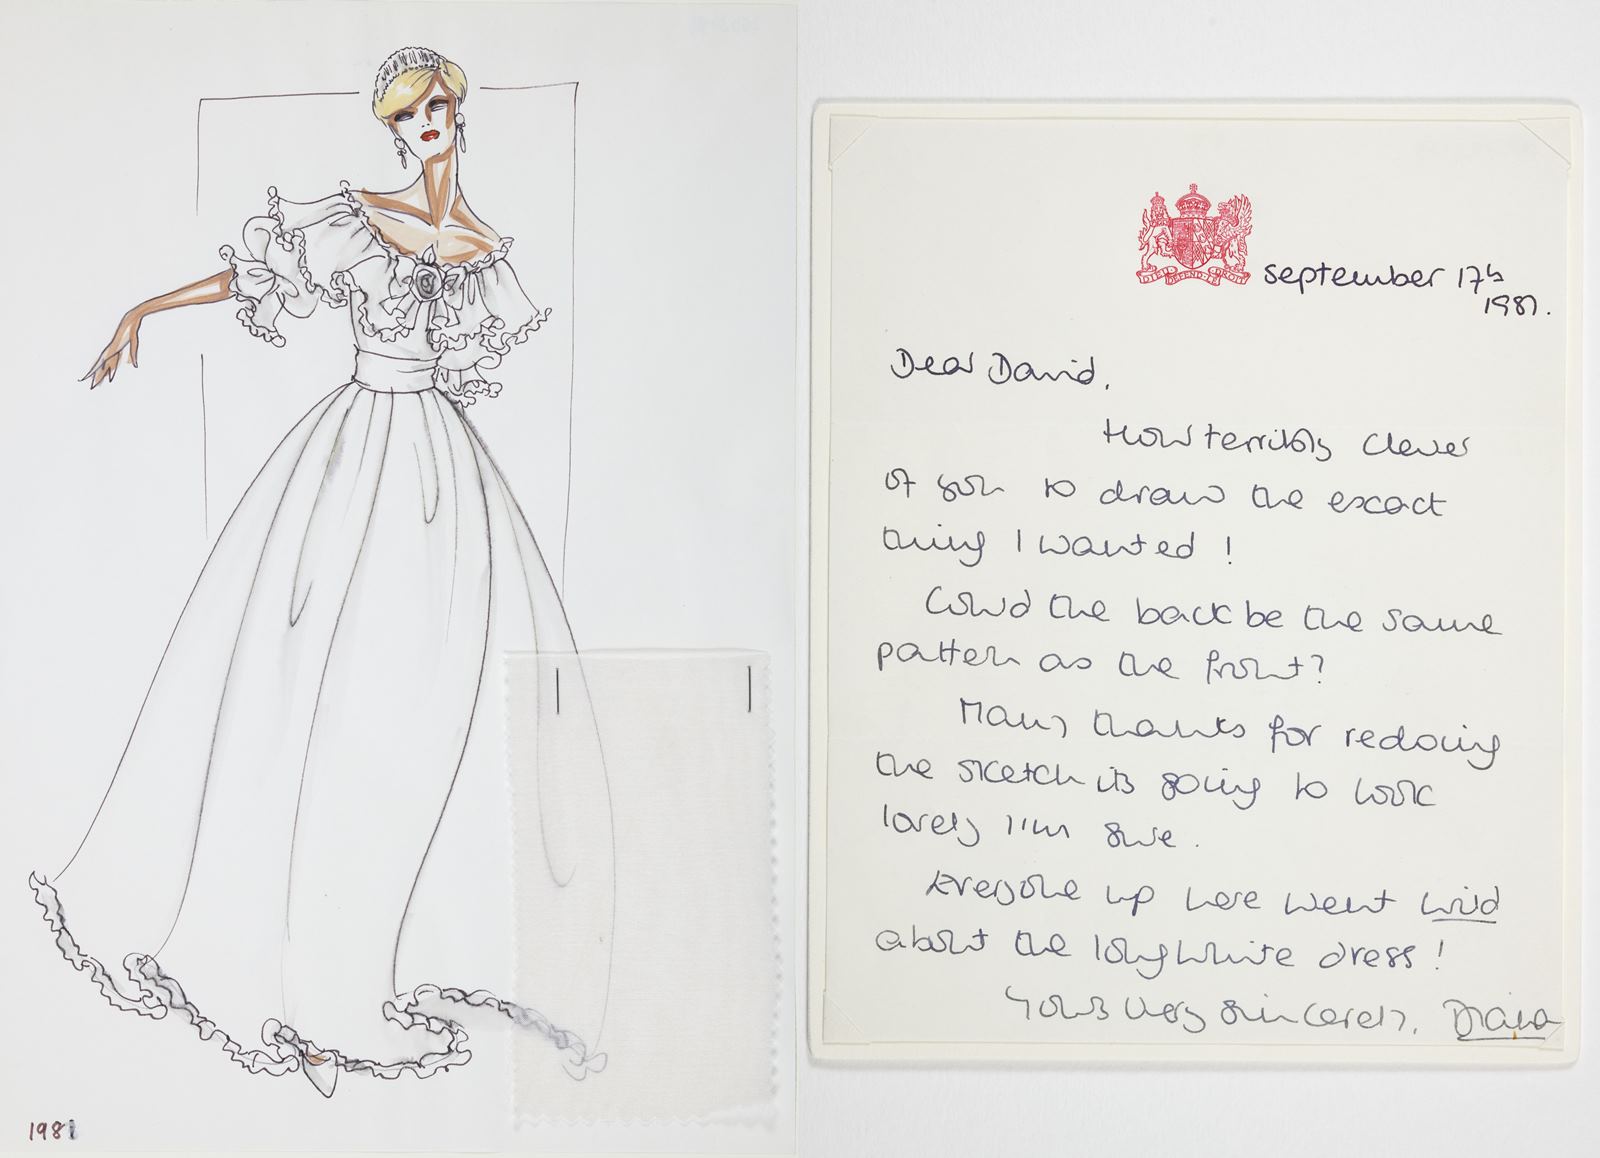 Sketches of Princess Diana’s dresses by David Sassoon
Diana had more 70 Bellville Sassoon outfits made between 1981 and her death in 1997. Her annotations here demonstrate her involvement in the process of having a dress designed. (Courtesy Historic Royal Palaces/ The Gift of David Sassoon) 
